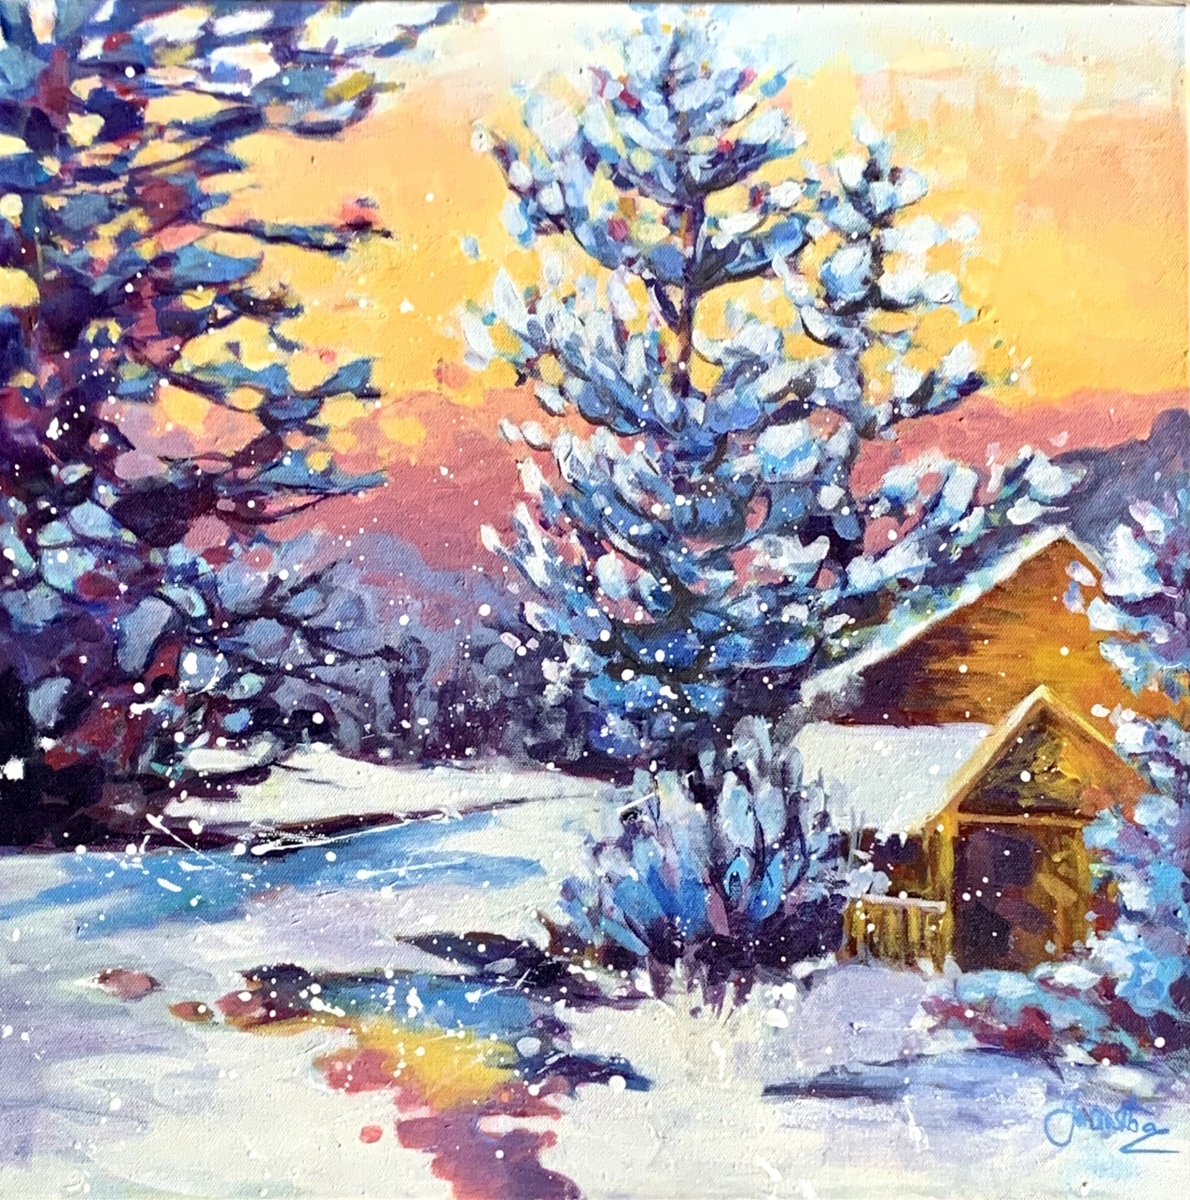 SOLD - CABIN IN THE SNOW